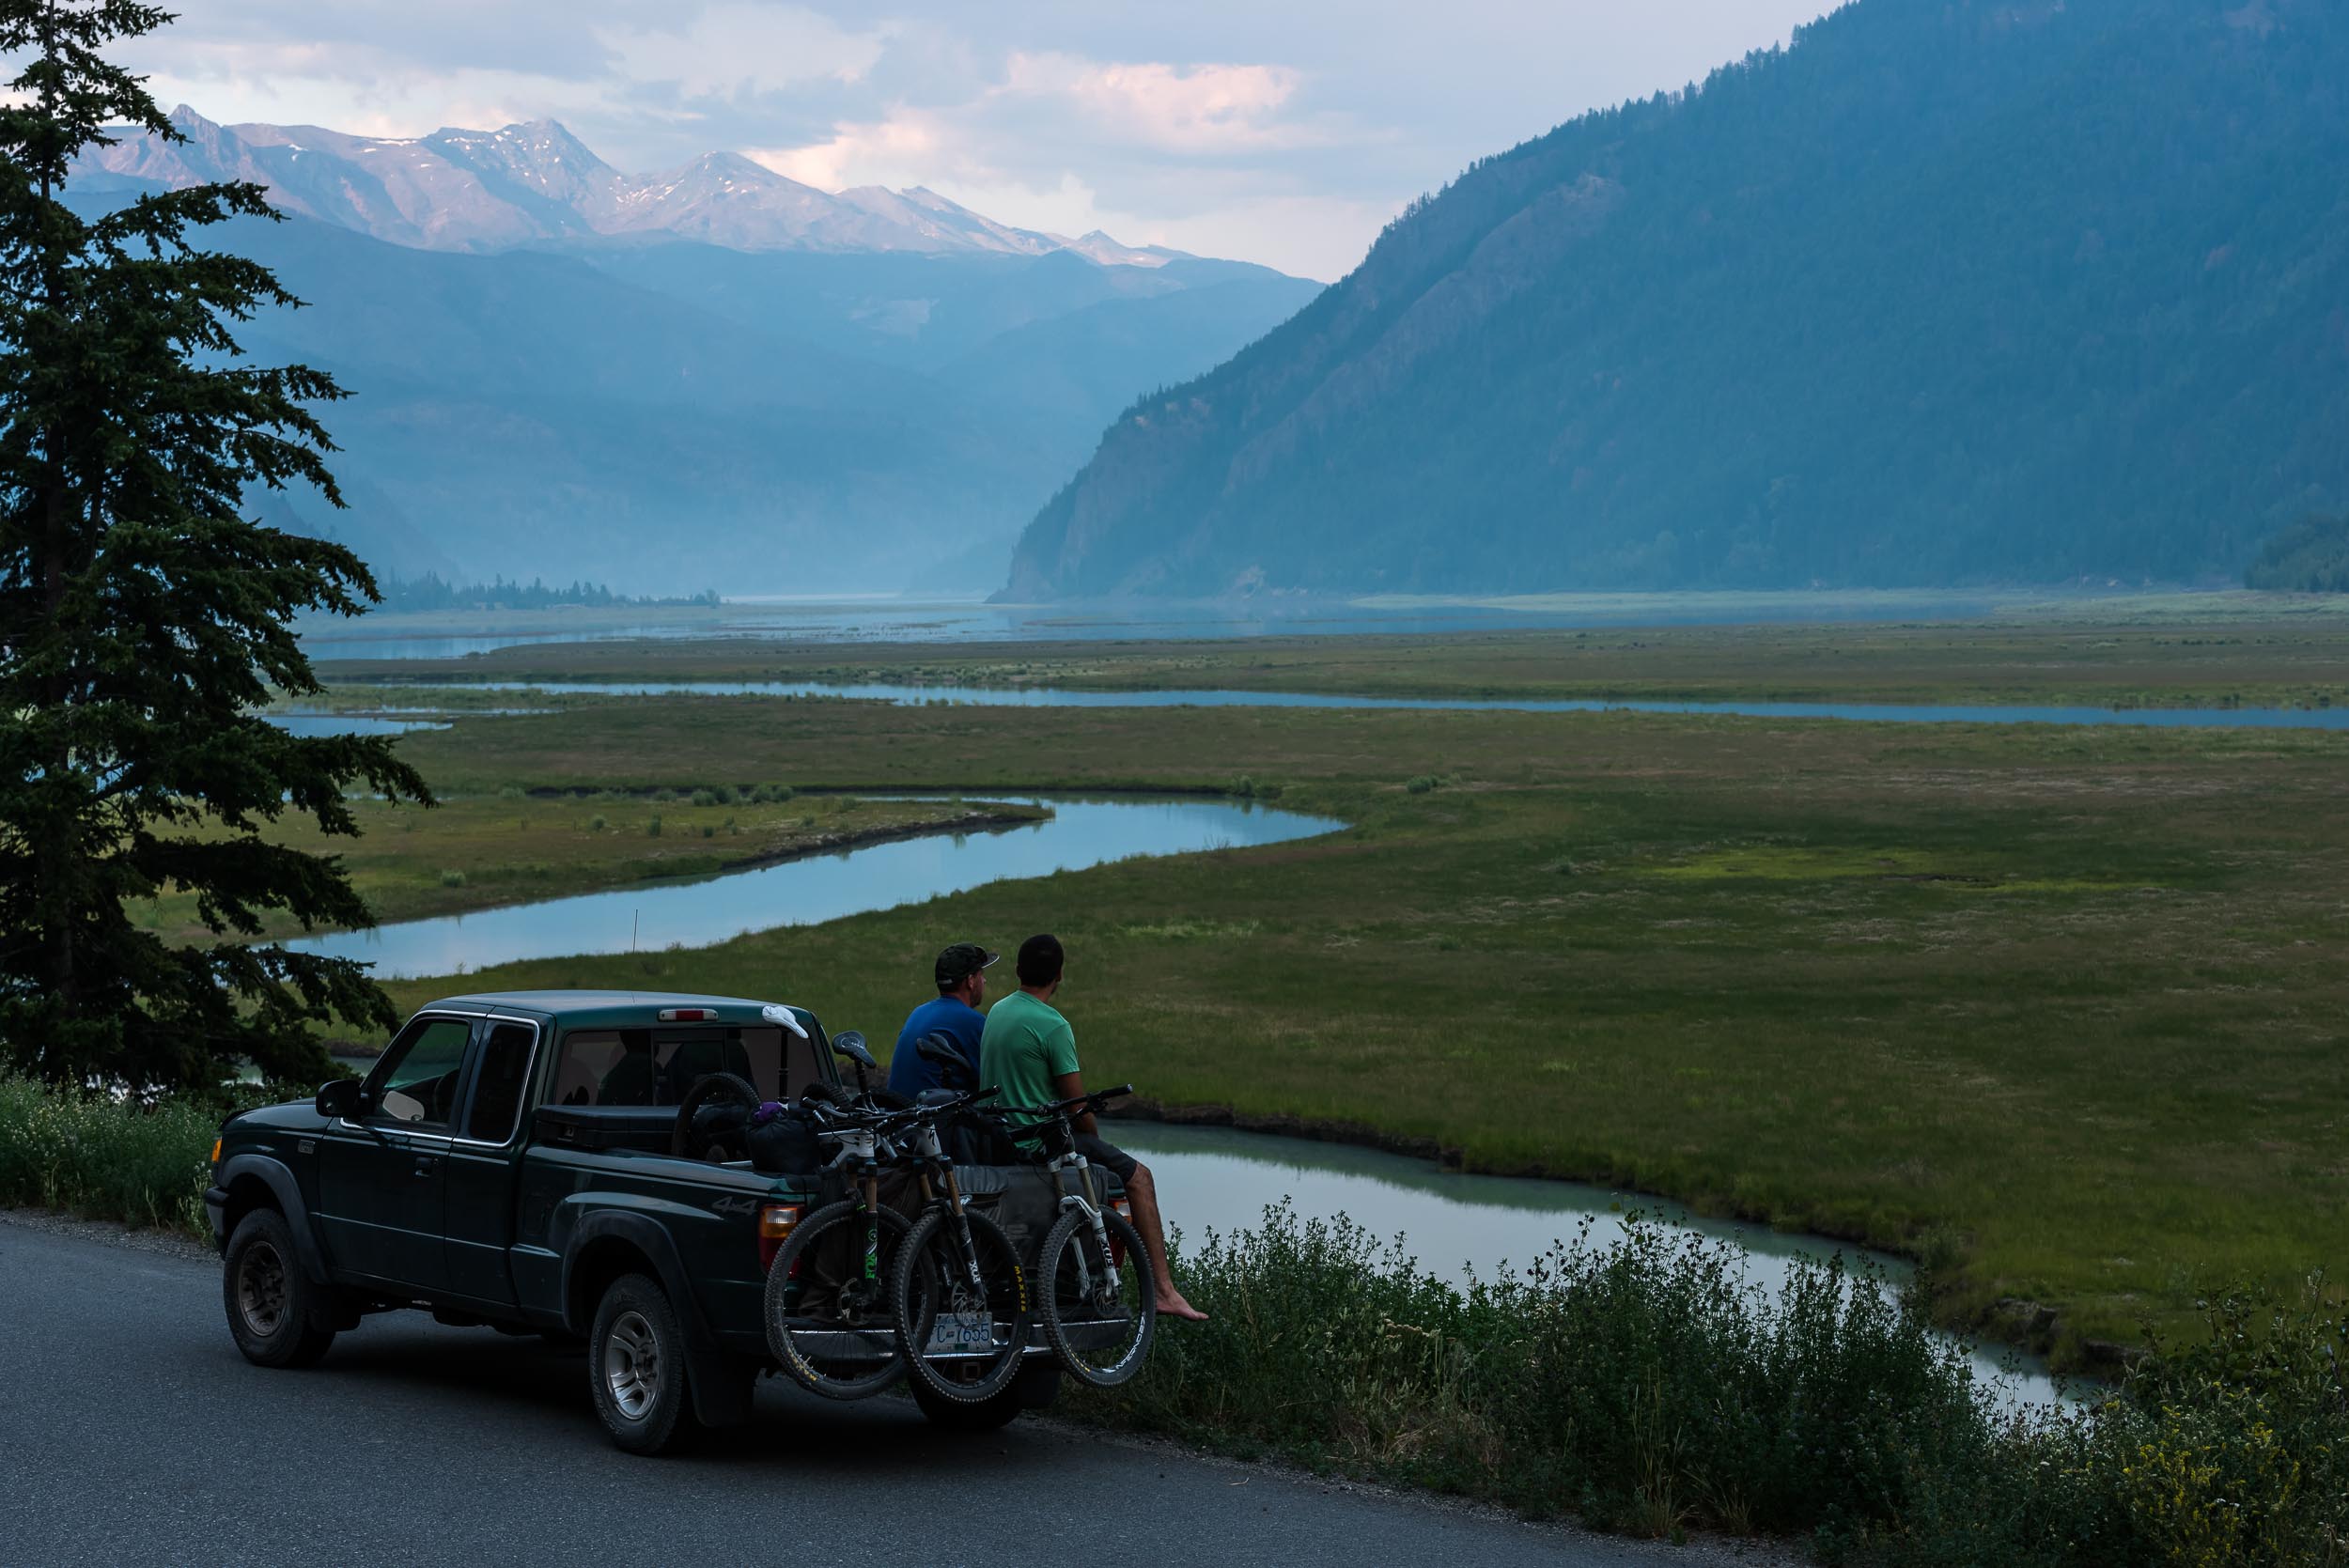 Mountain bikers sitting on a truck on the side of the road near Gold Bridge in the Bridge River Valley. Credit: BC/Reuben Krabbe